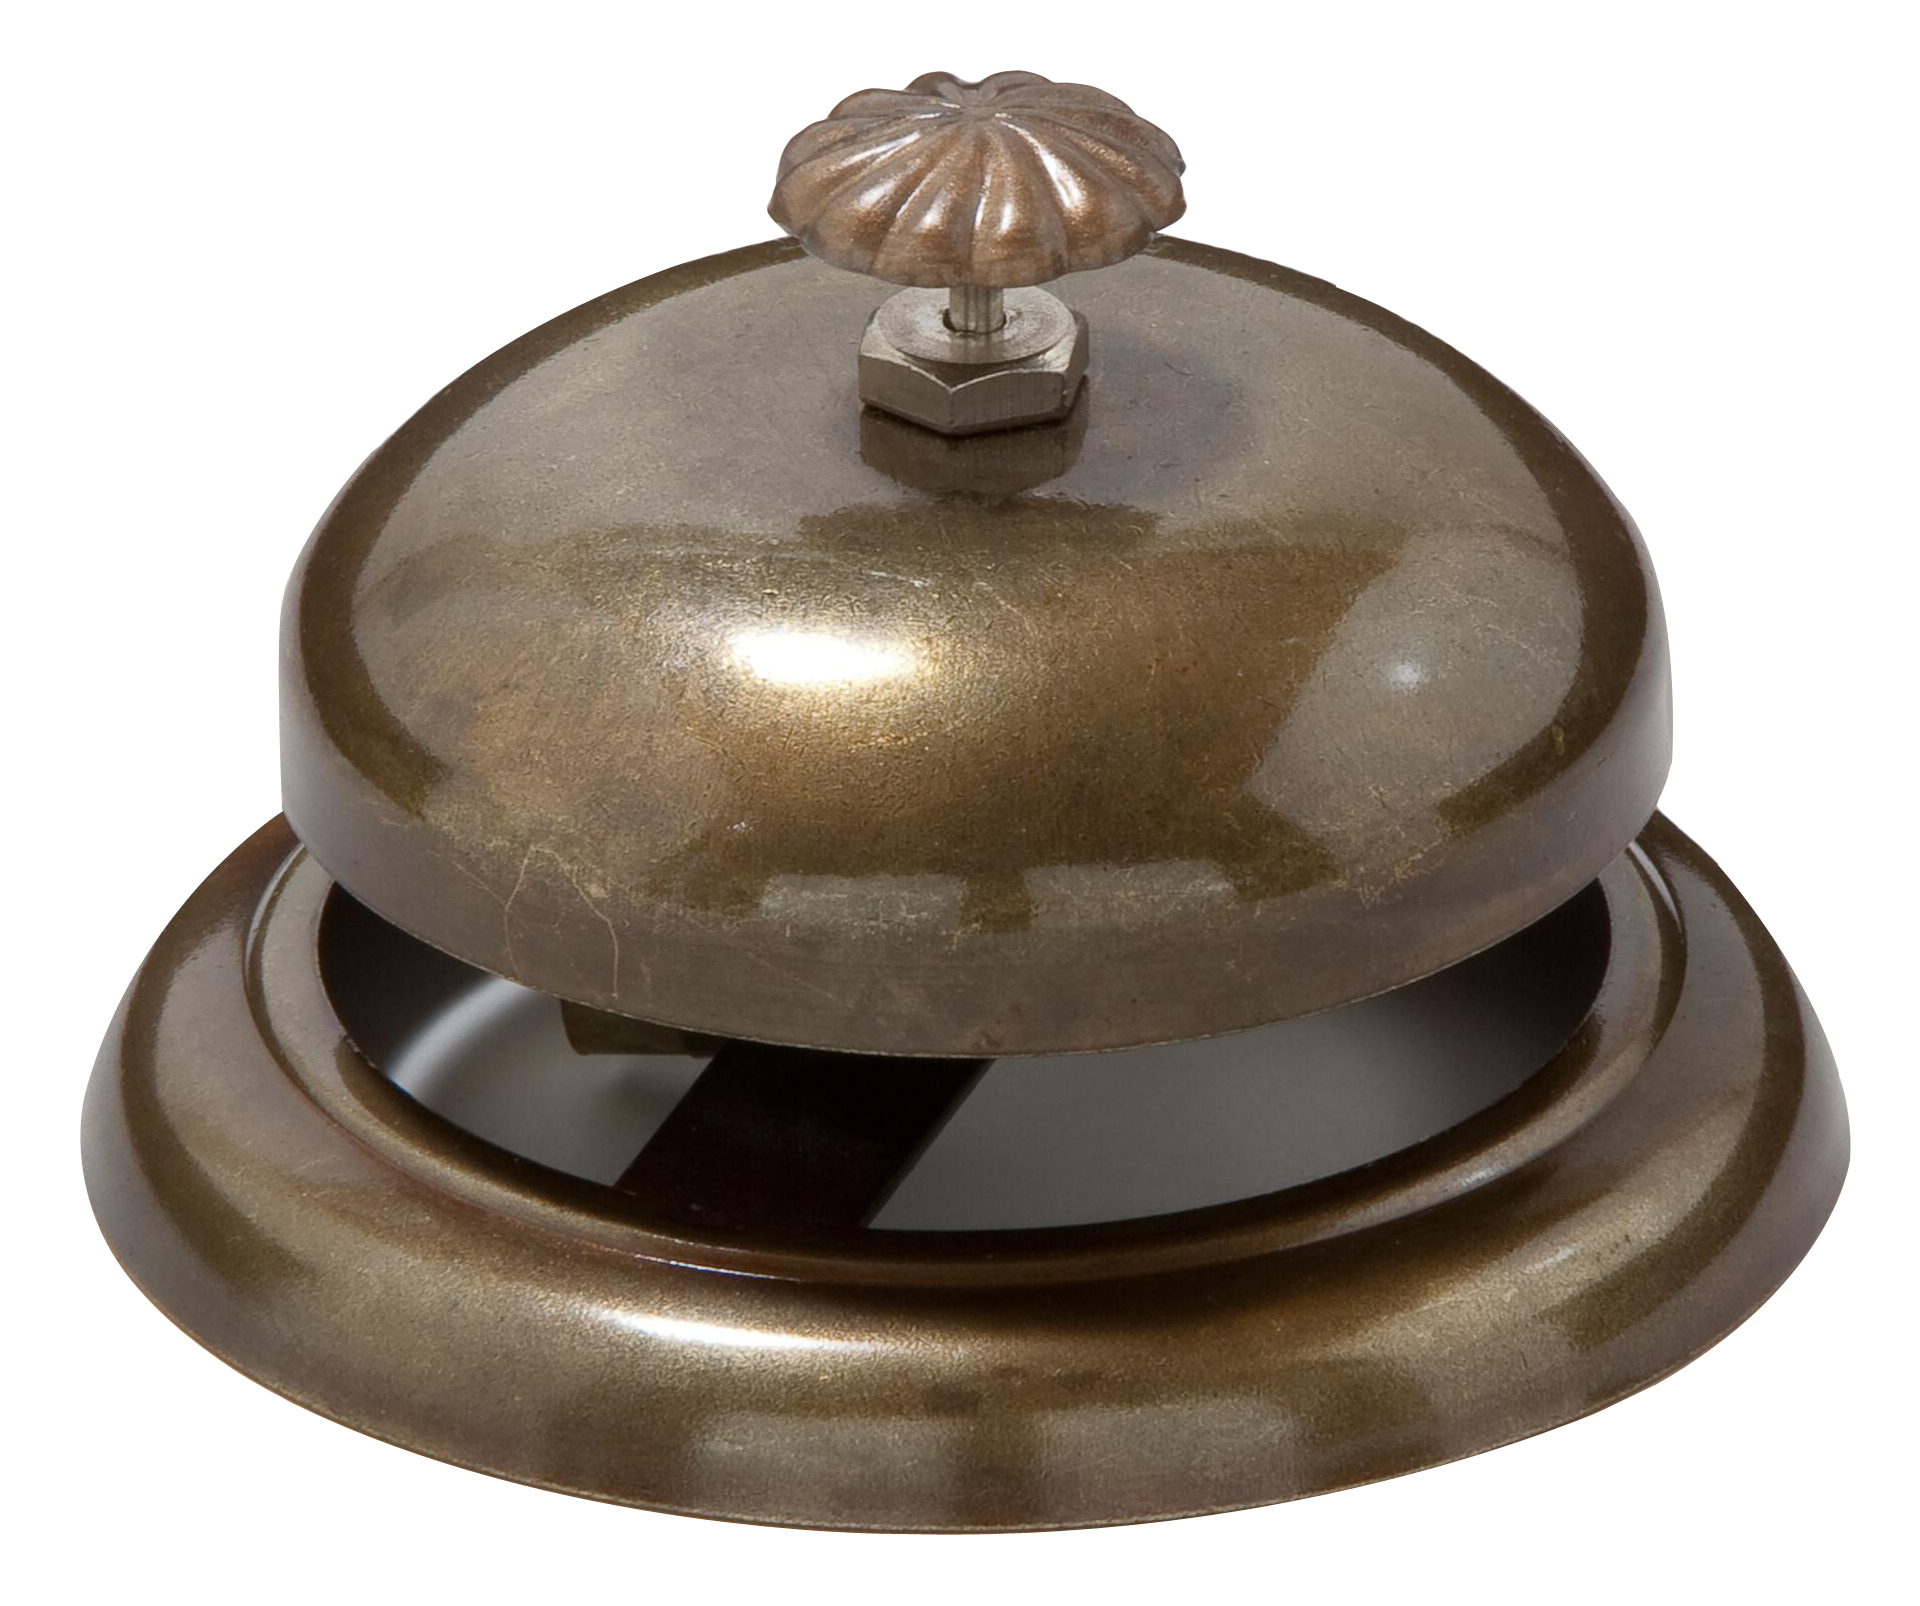 A Bell With A Knob